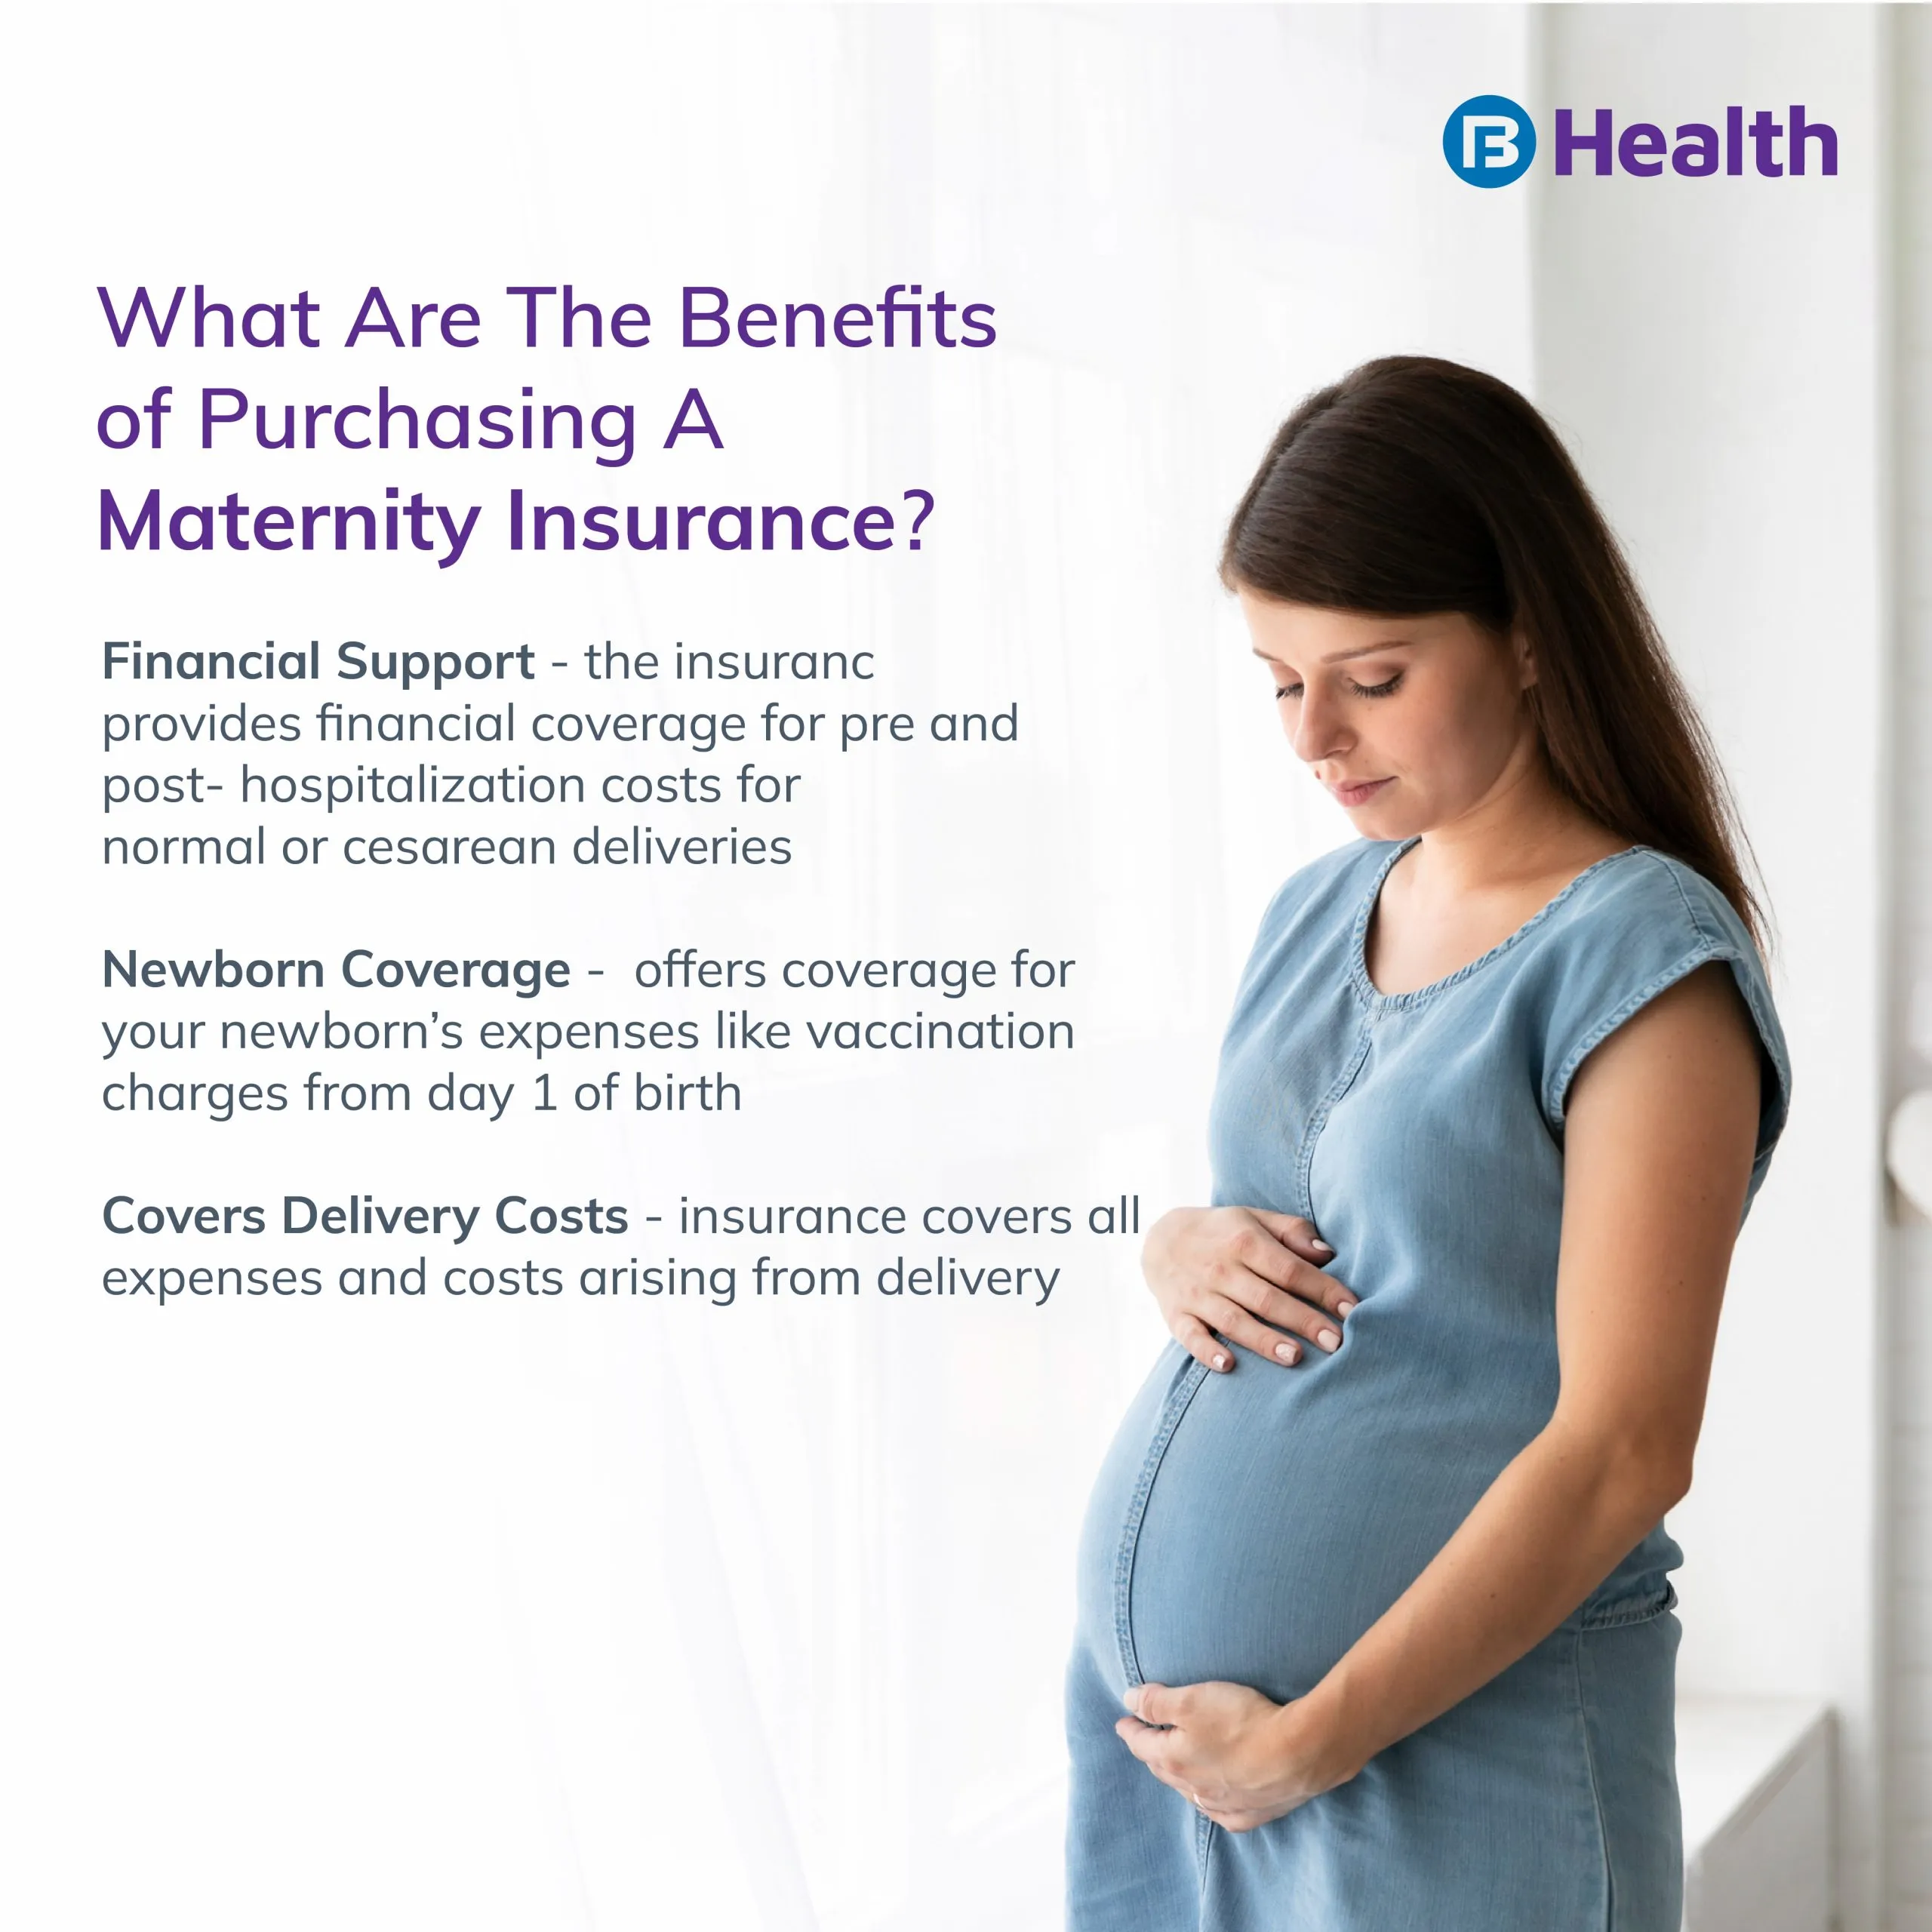 StarHealth Insurance, Maternity Insurance Plan with New Born Coverage